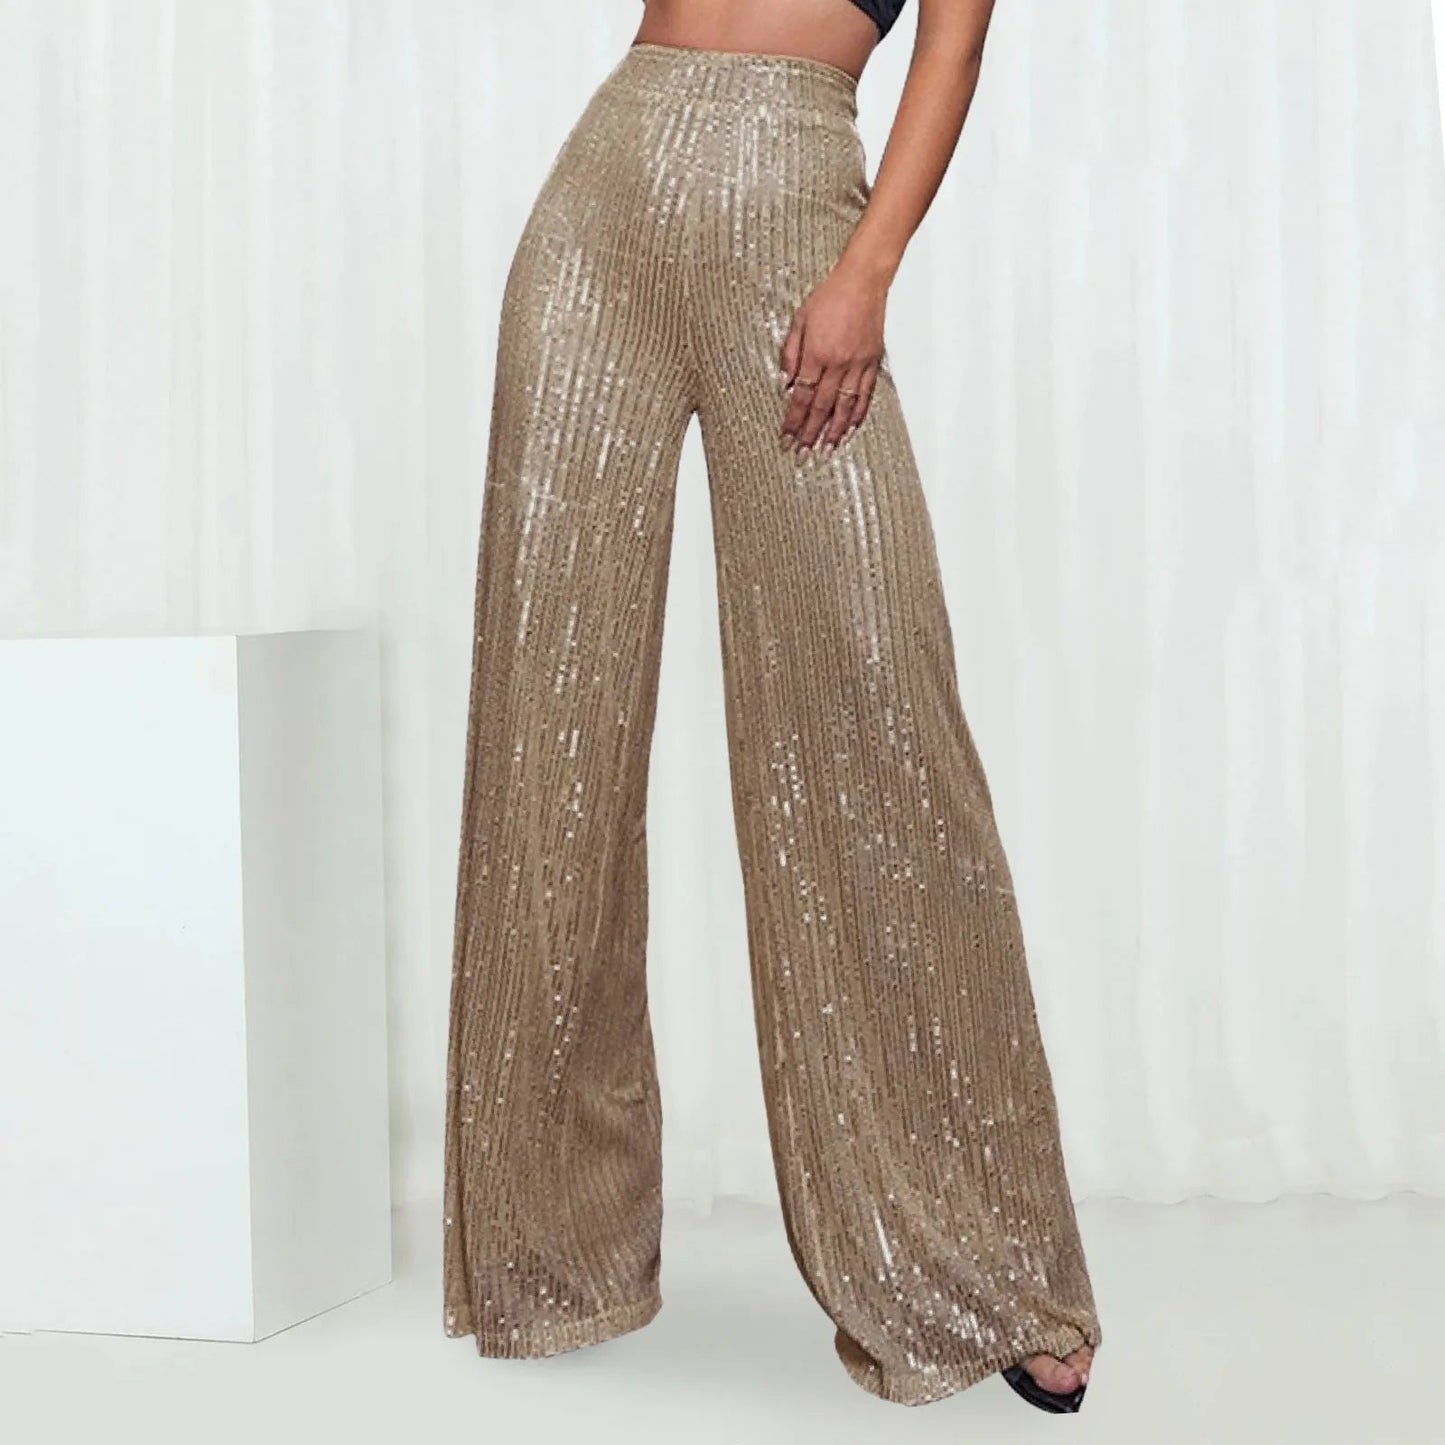 Women's Shiny Sequin Bell Bottom Pants - BeExtra! Apparel & More